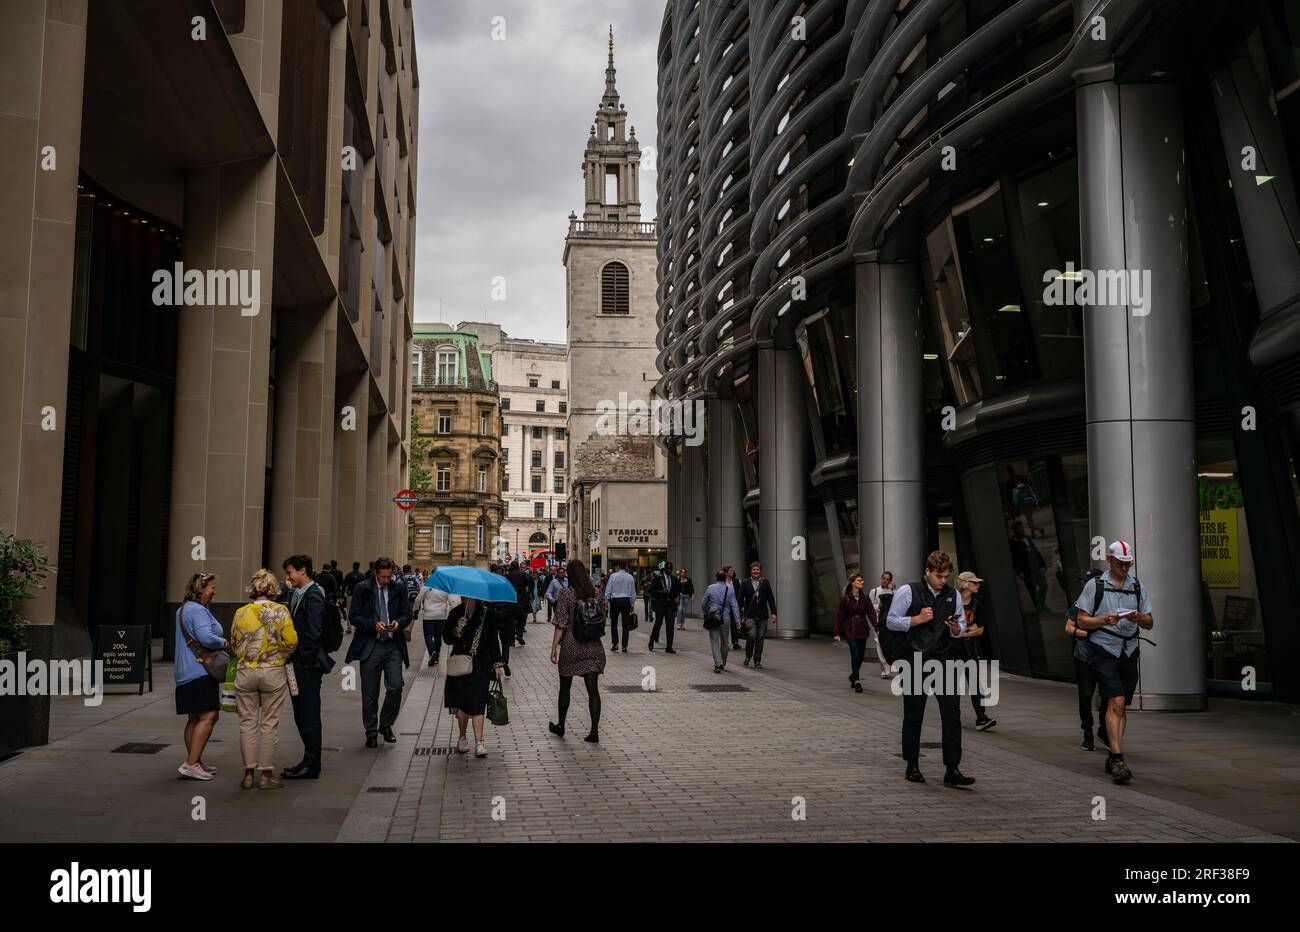 London, UK: People walking along Walbrook in the City of London. The Church of St Stephen Walbrook is at the end of the road. Stock Photo